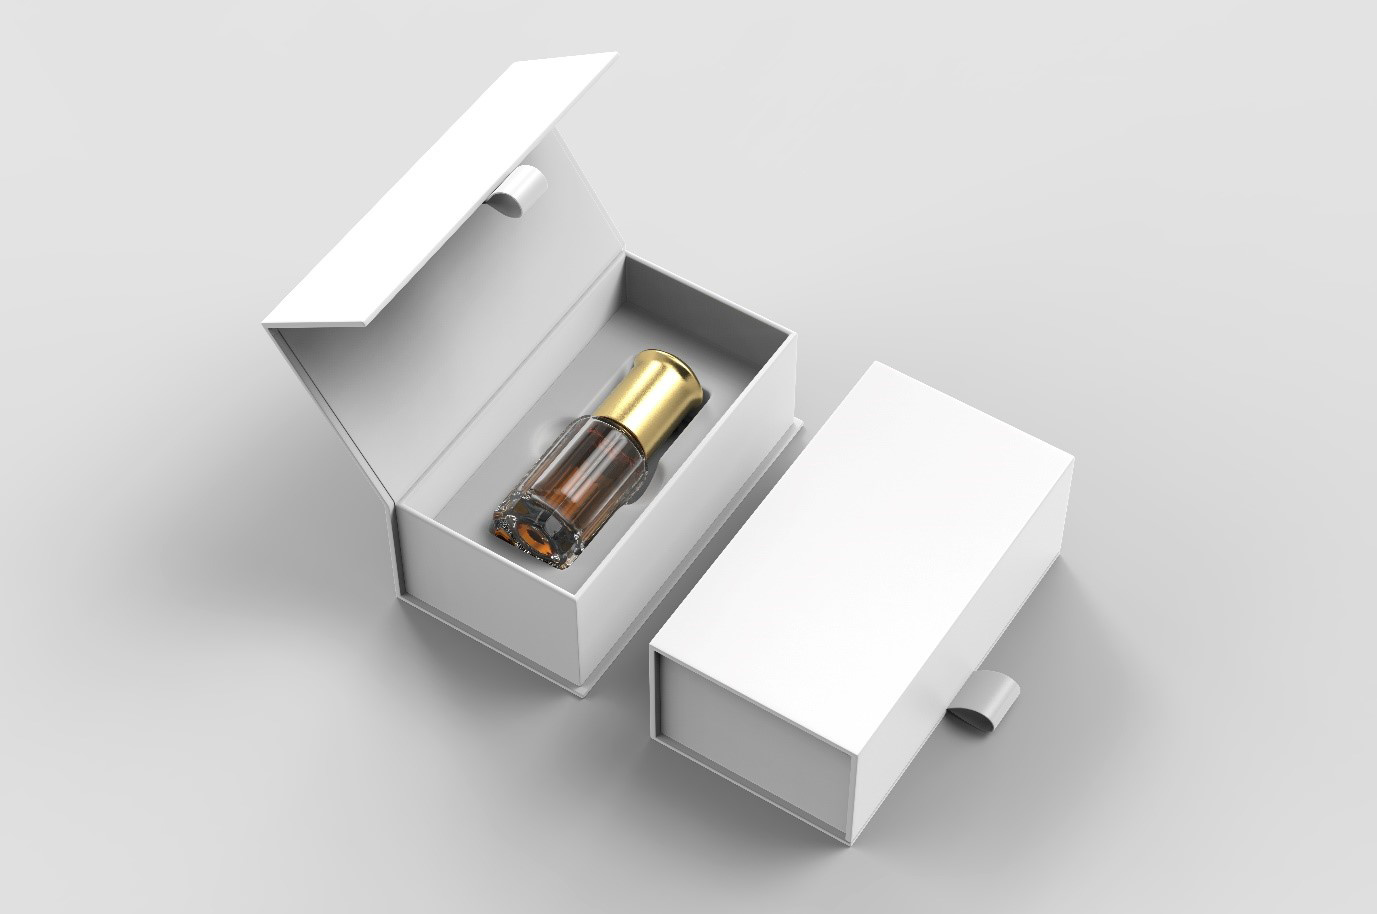 White Boxed Packaging with Pull Tab and Fragrance Bottle Inside